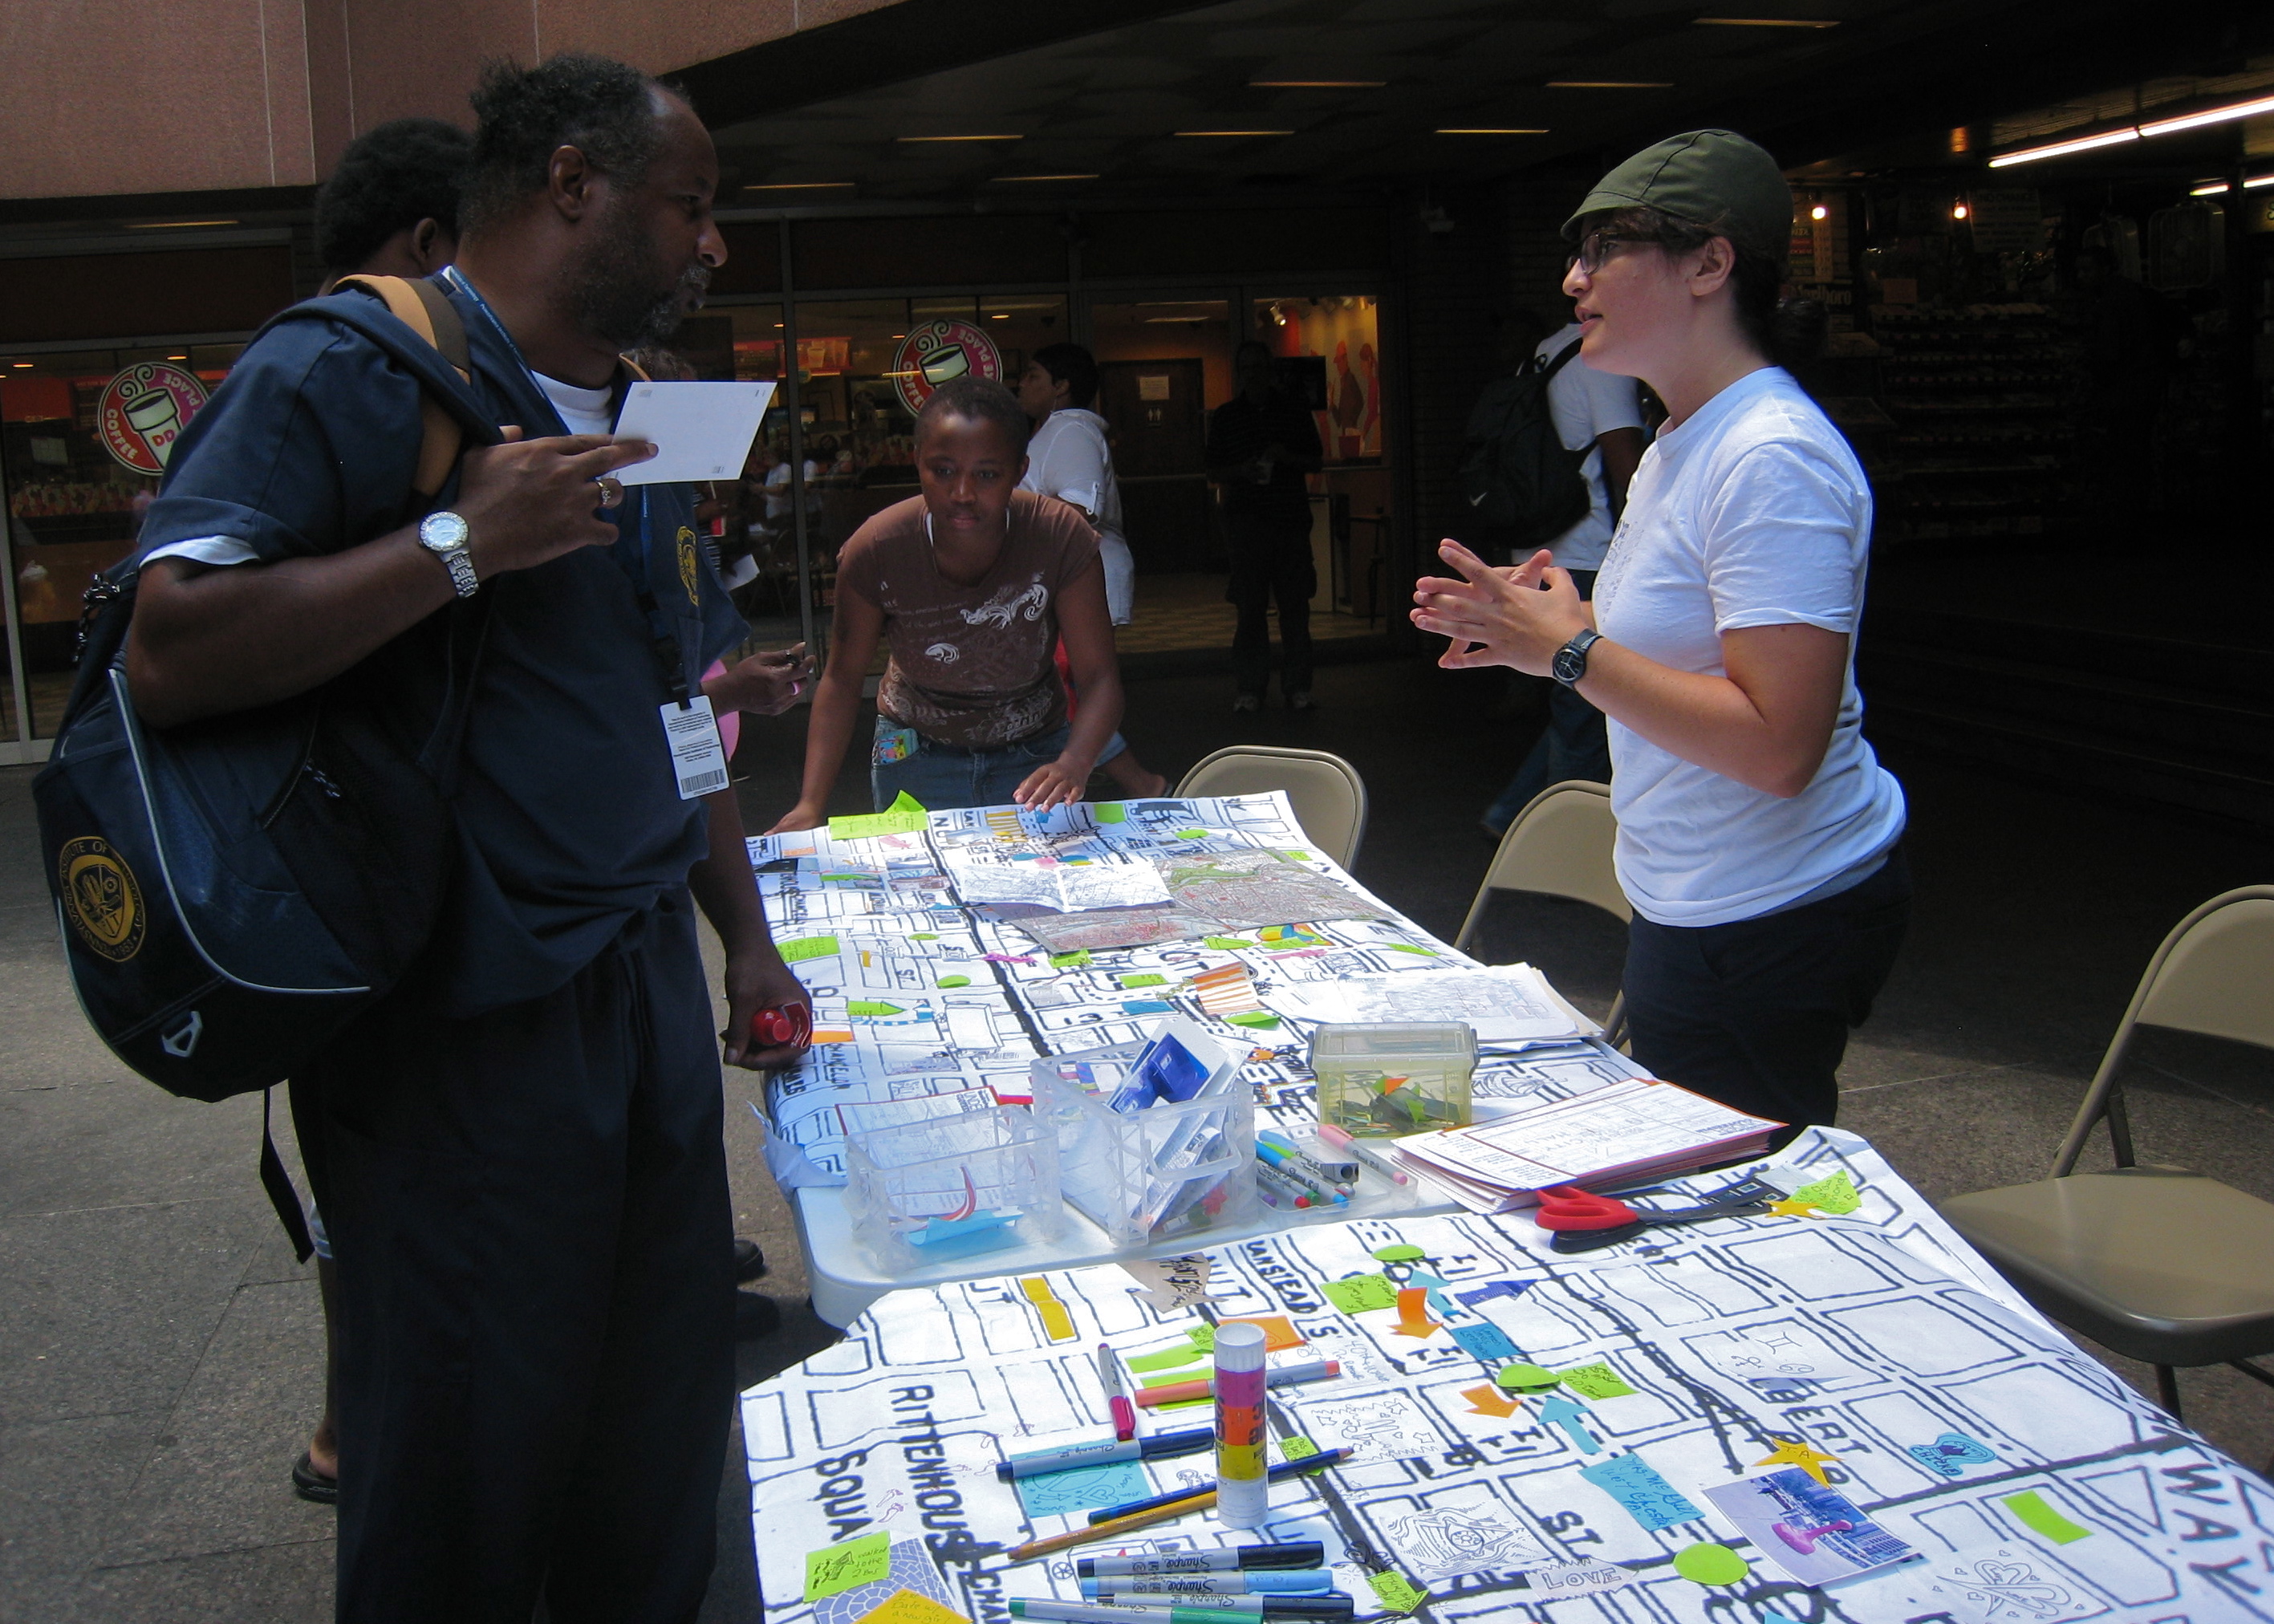 Miriam Singer (right) talking to people passing through Centre Square's subway concourse entrance, asking them to add their routes and stories to the big map.